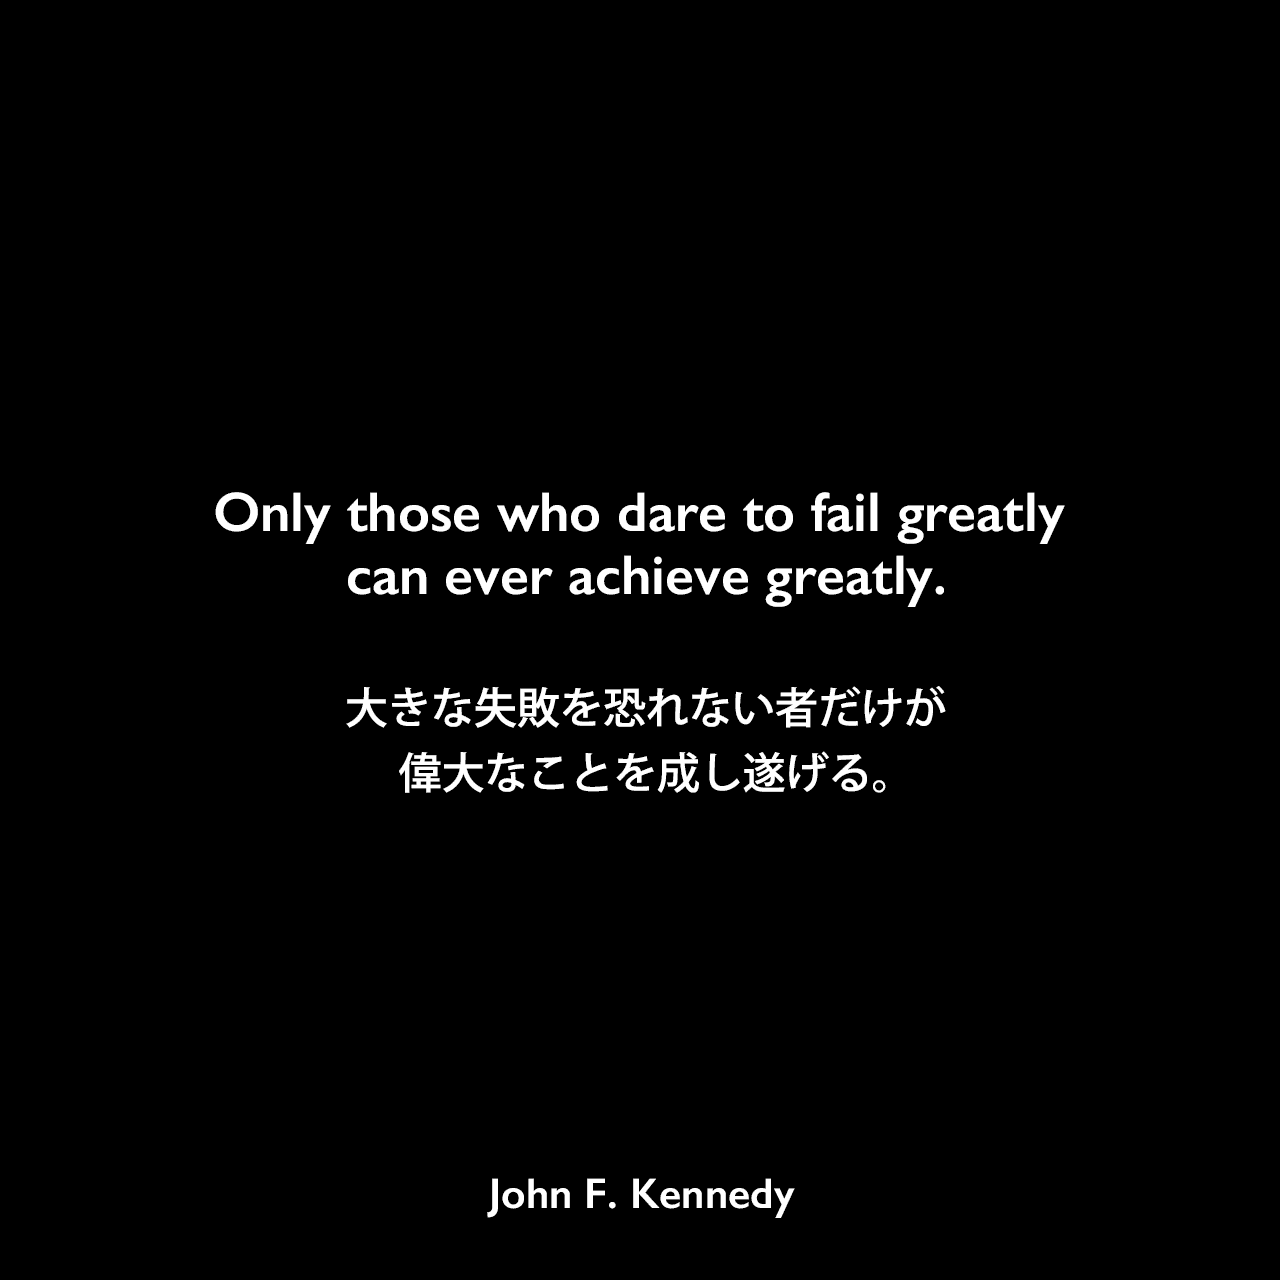 Only those who dare to fail greatly can ever achieve greatly.大きな失敗を恐れない者だけが、偉大なことを成し遂げる。John F Kennedy